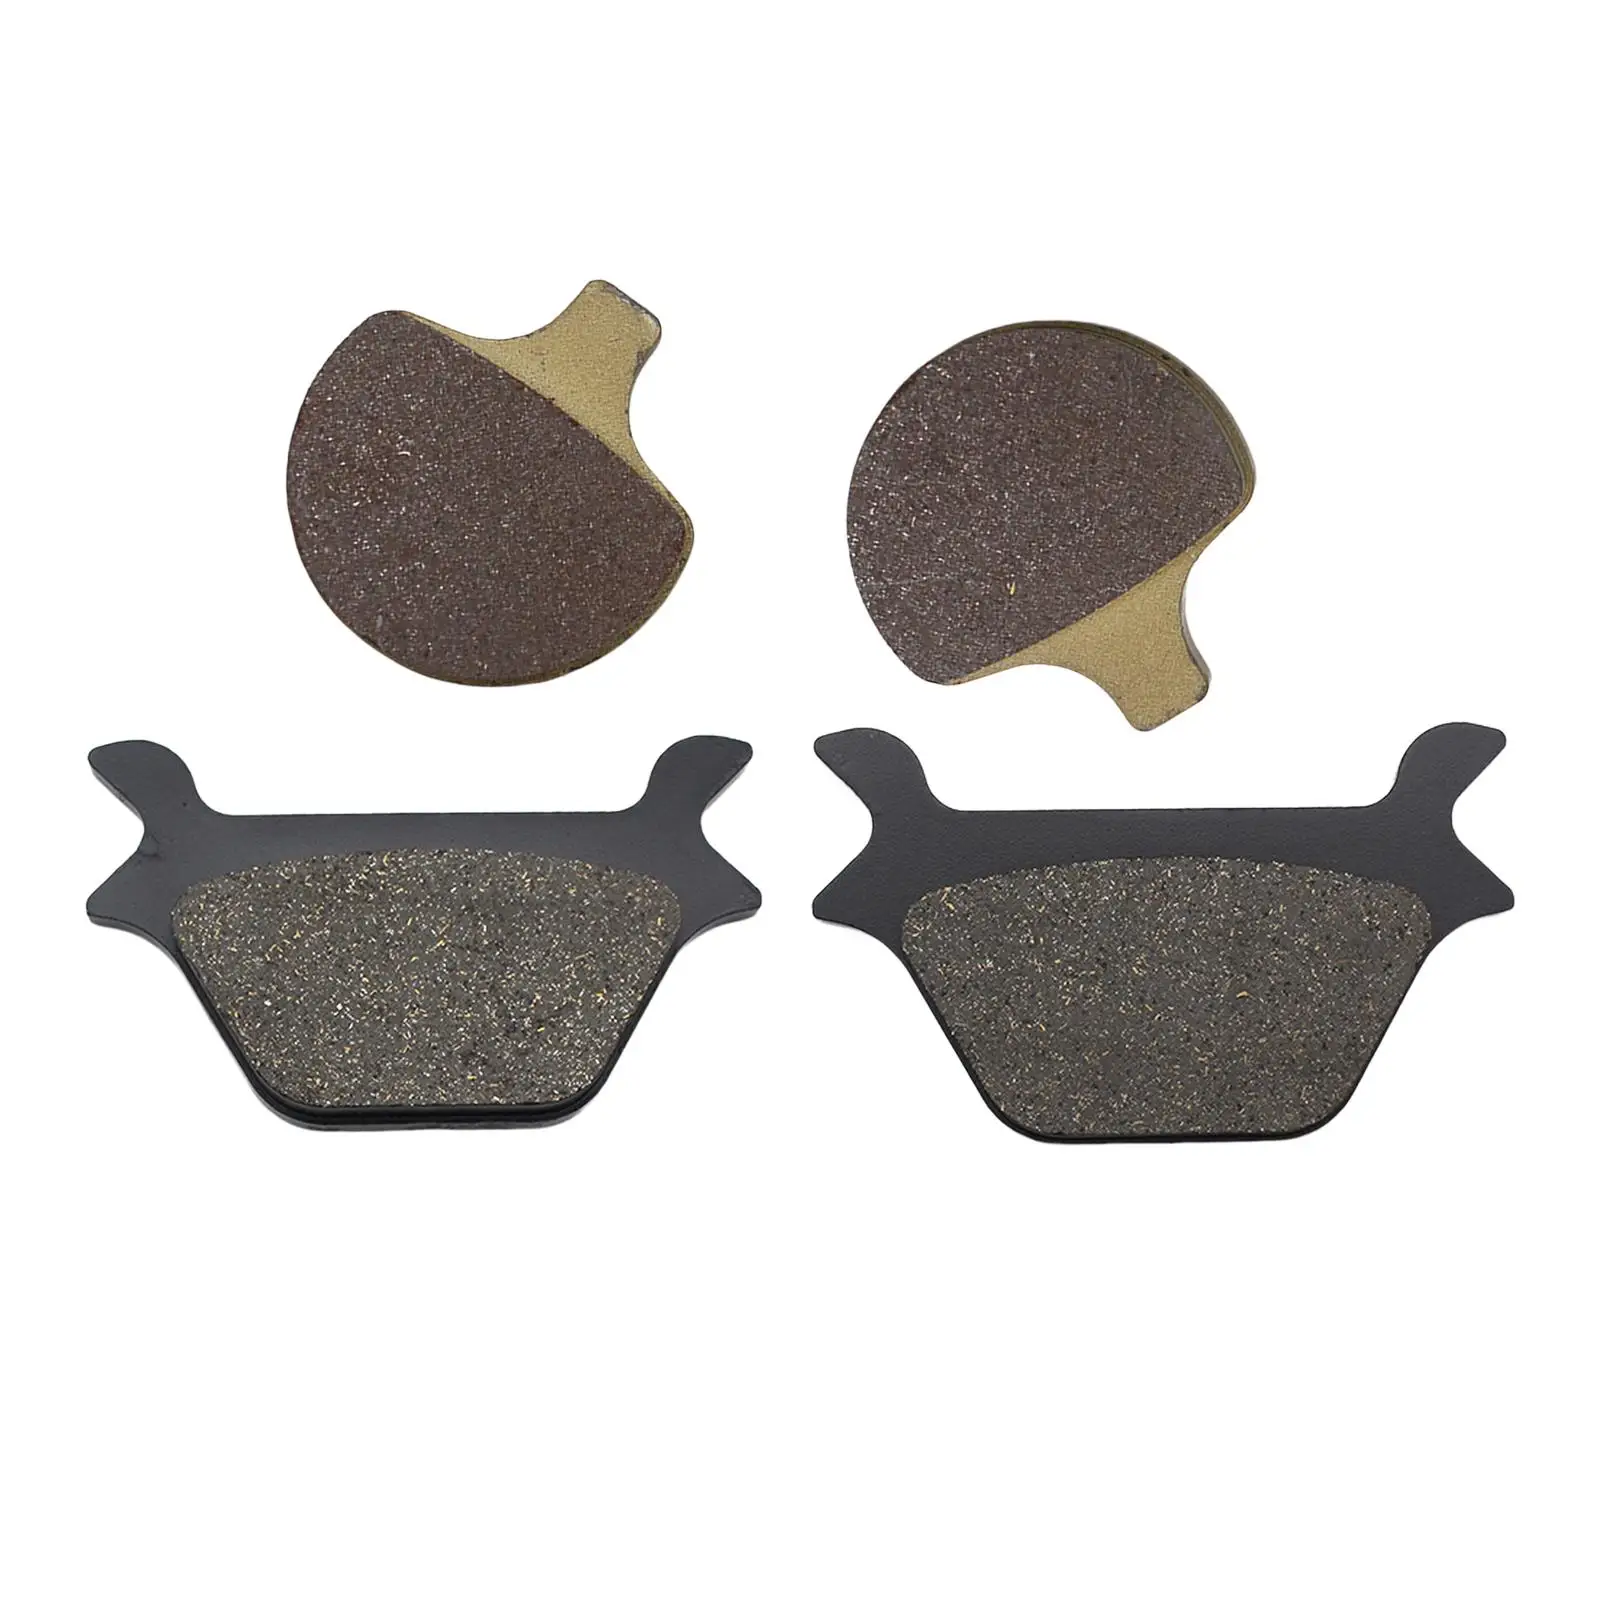 4Pcs Motorcycle Front Rear Brake Pads Wear Resistant Sturdy High Strength for